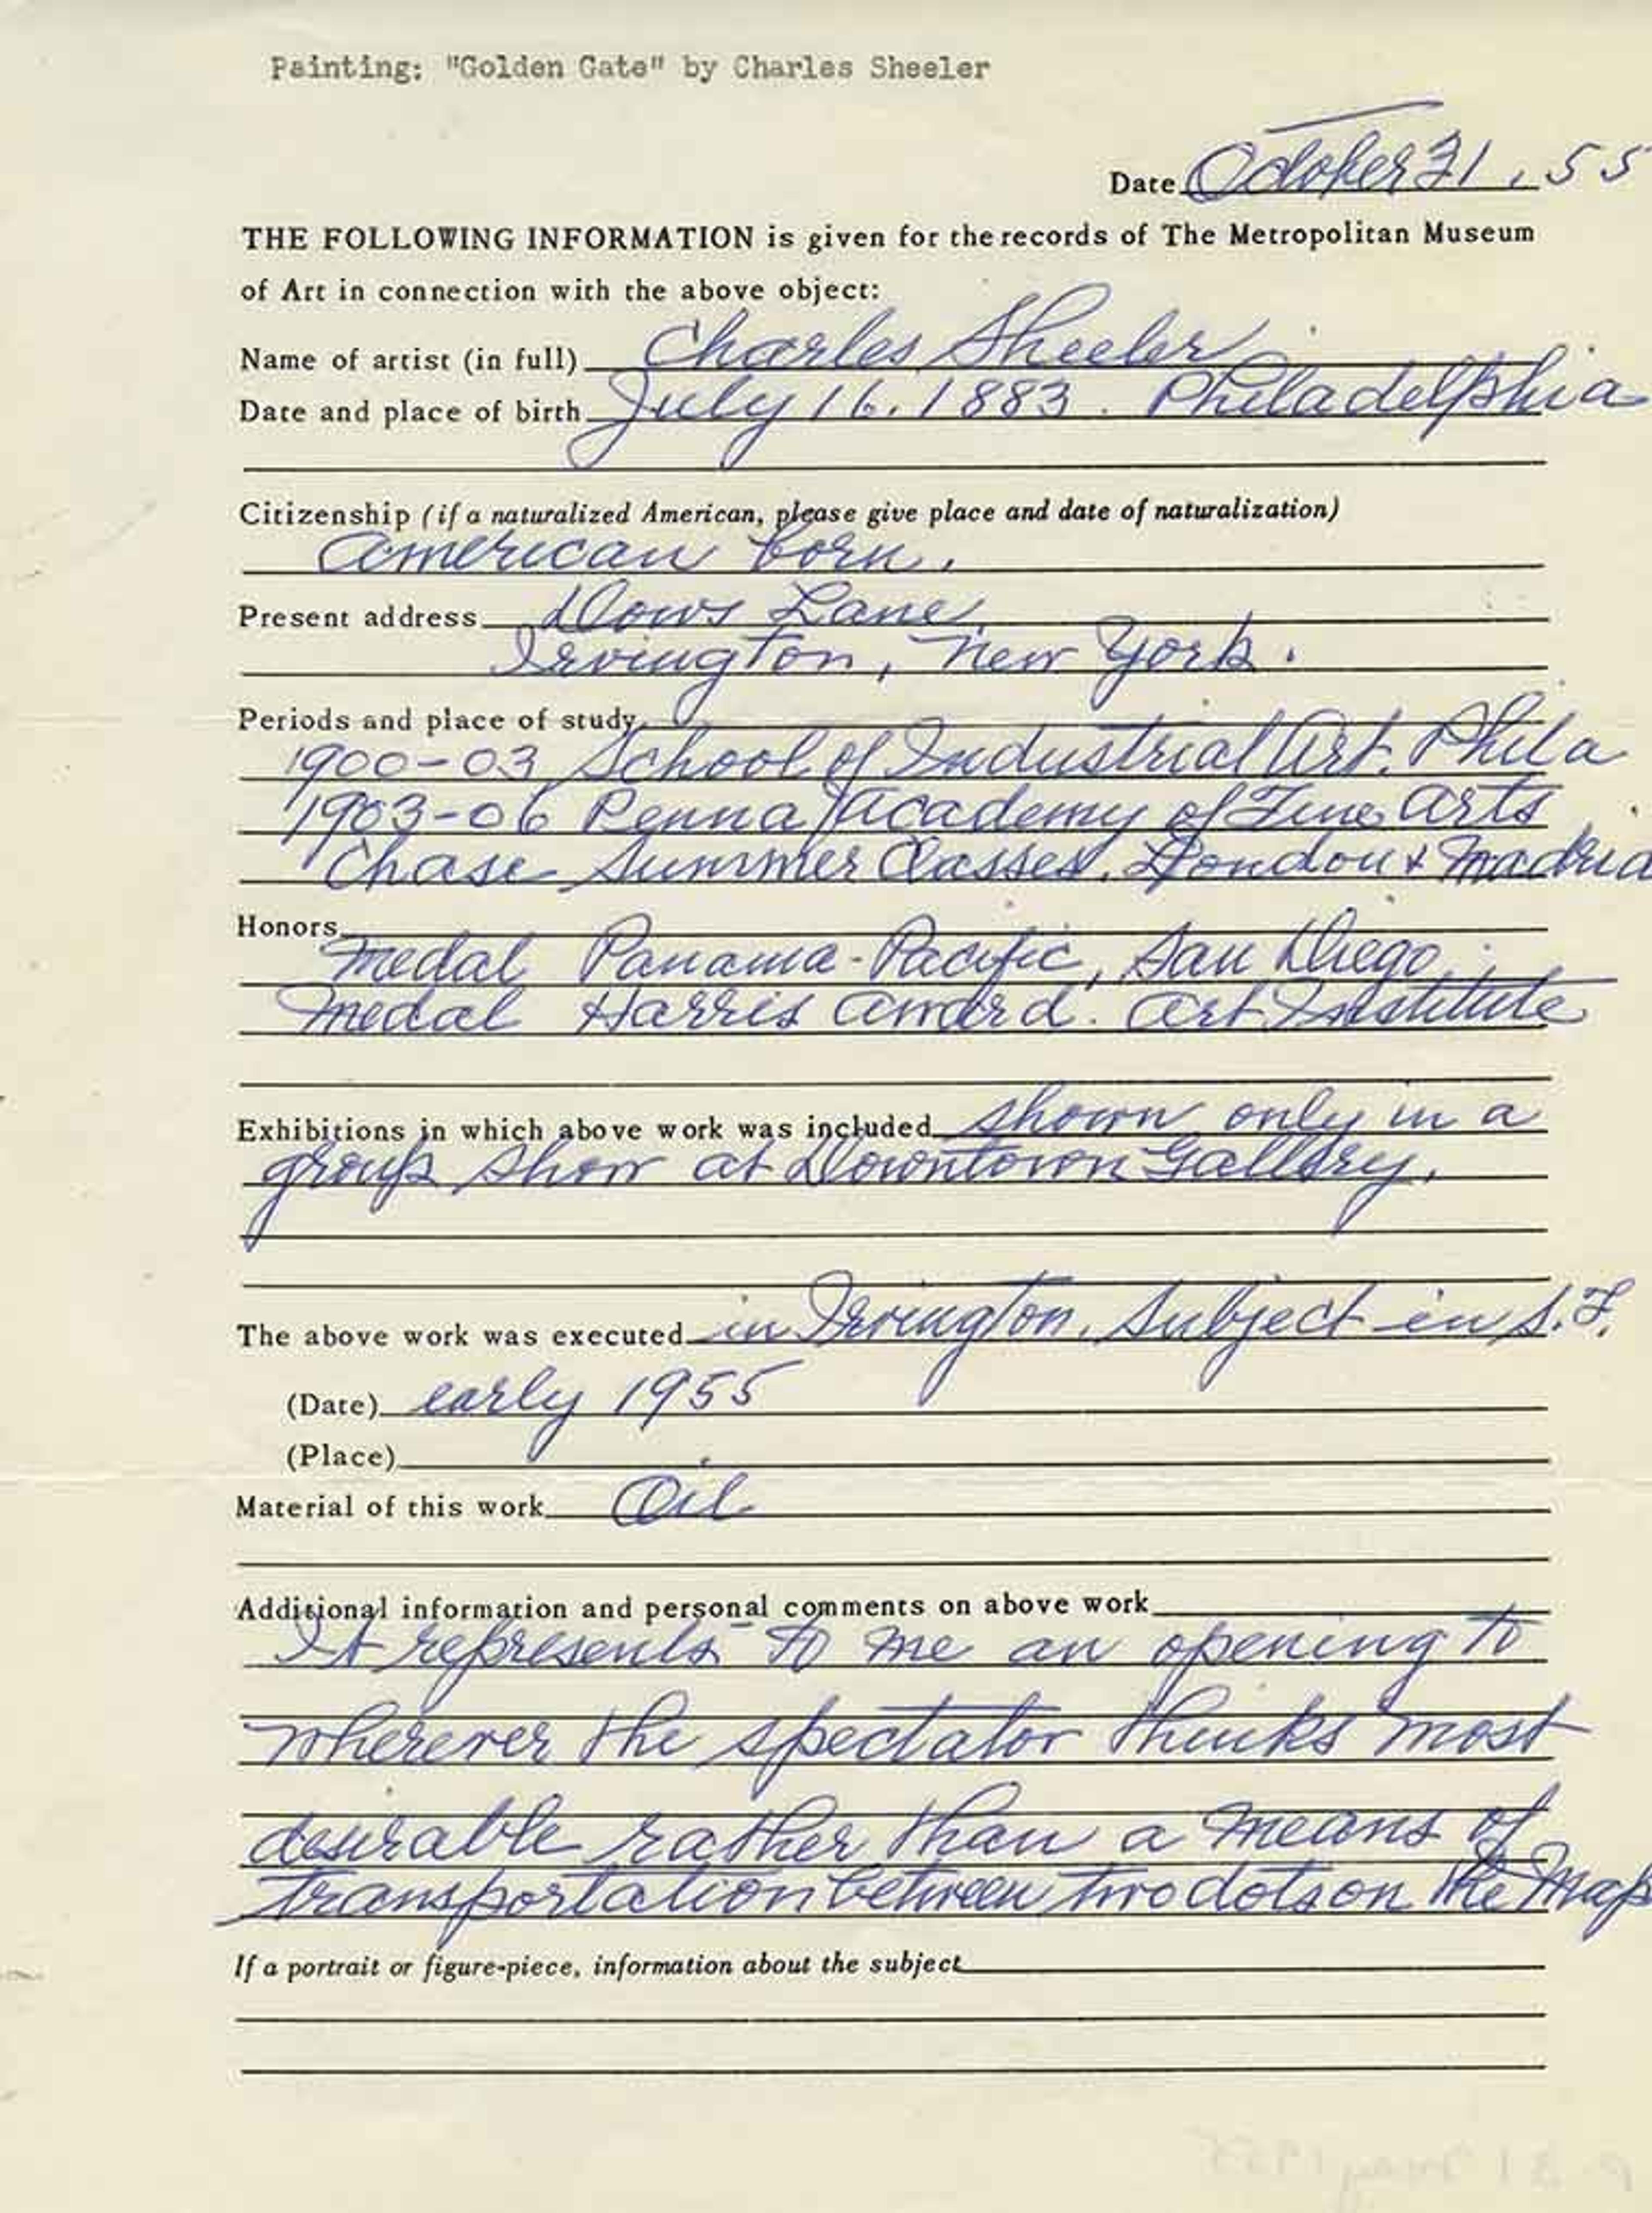 An intake form filled out by artist Charles Sheeler